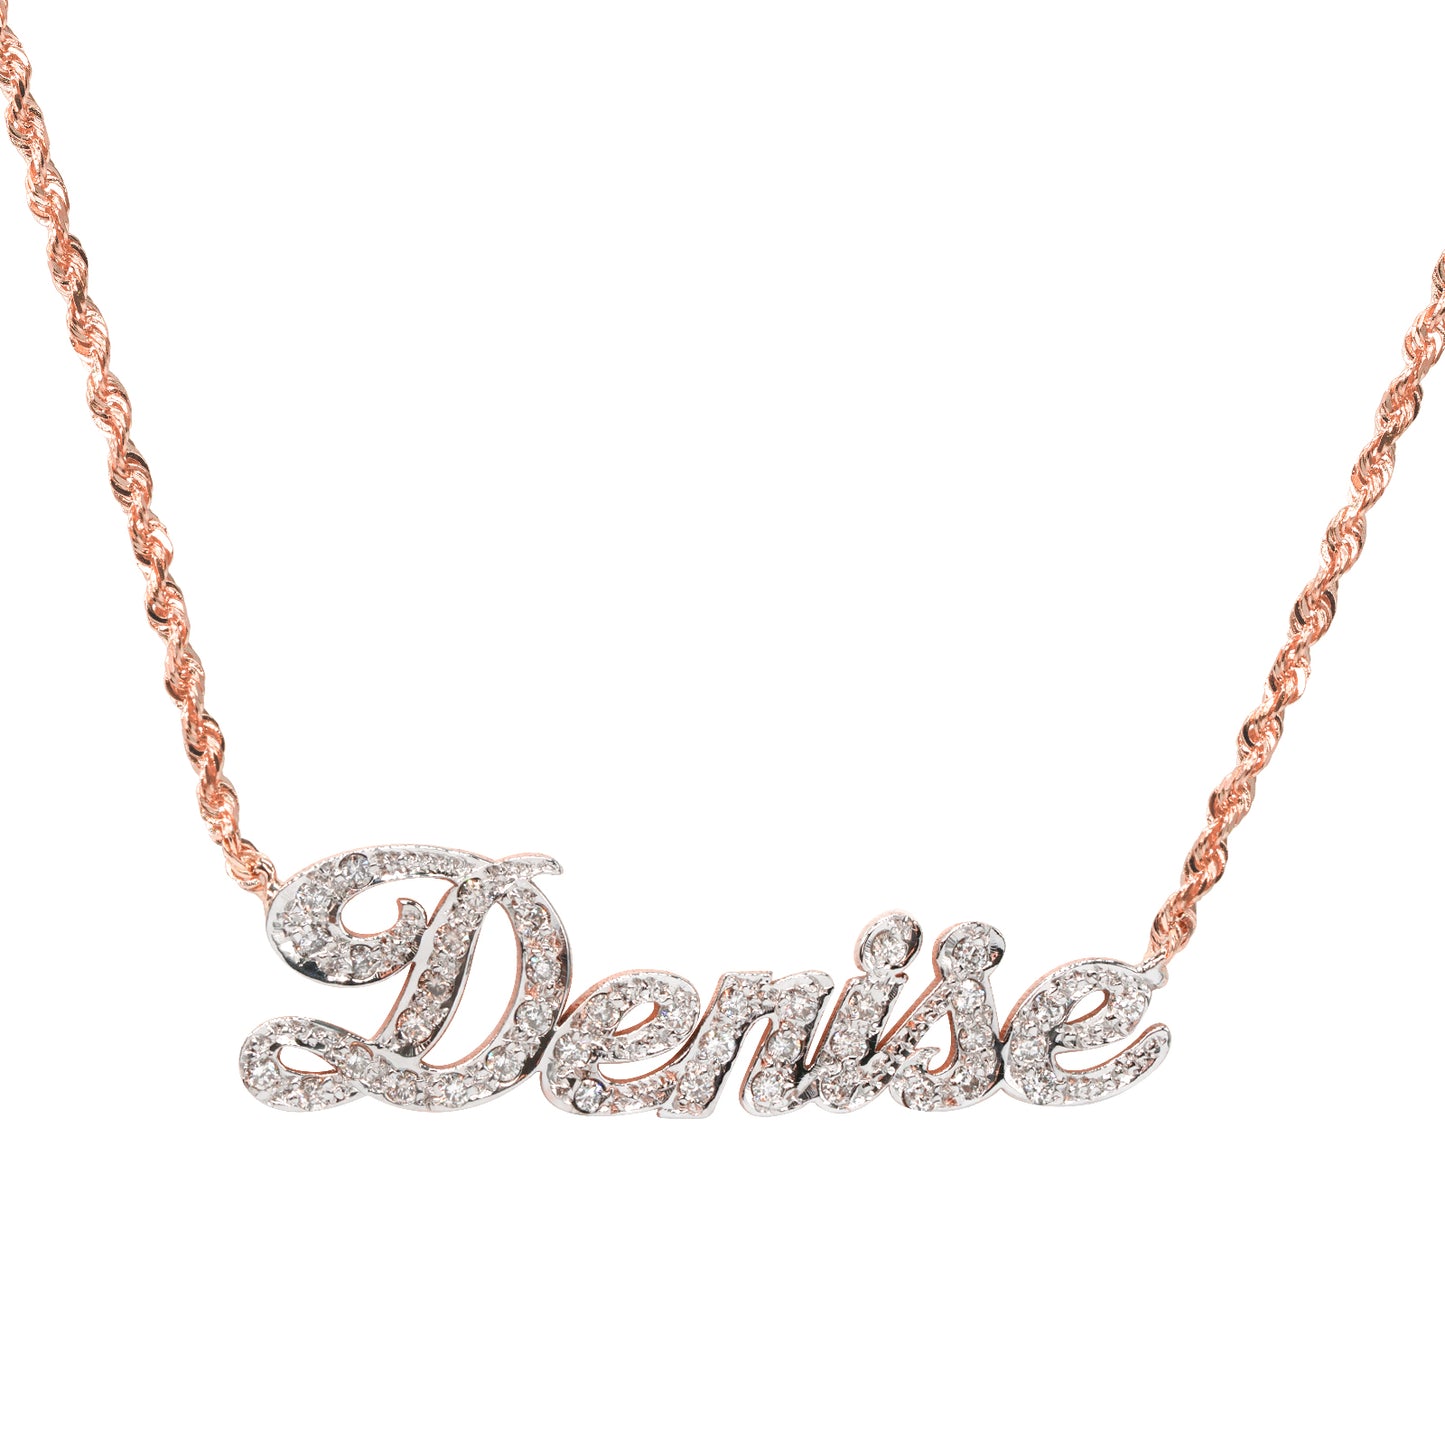 Personalized 14K Gold and Full Diamonds Name Plate | Rope Chain